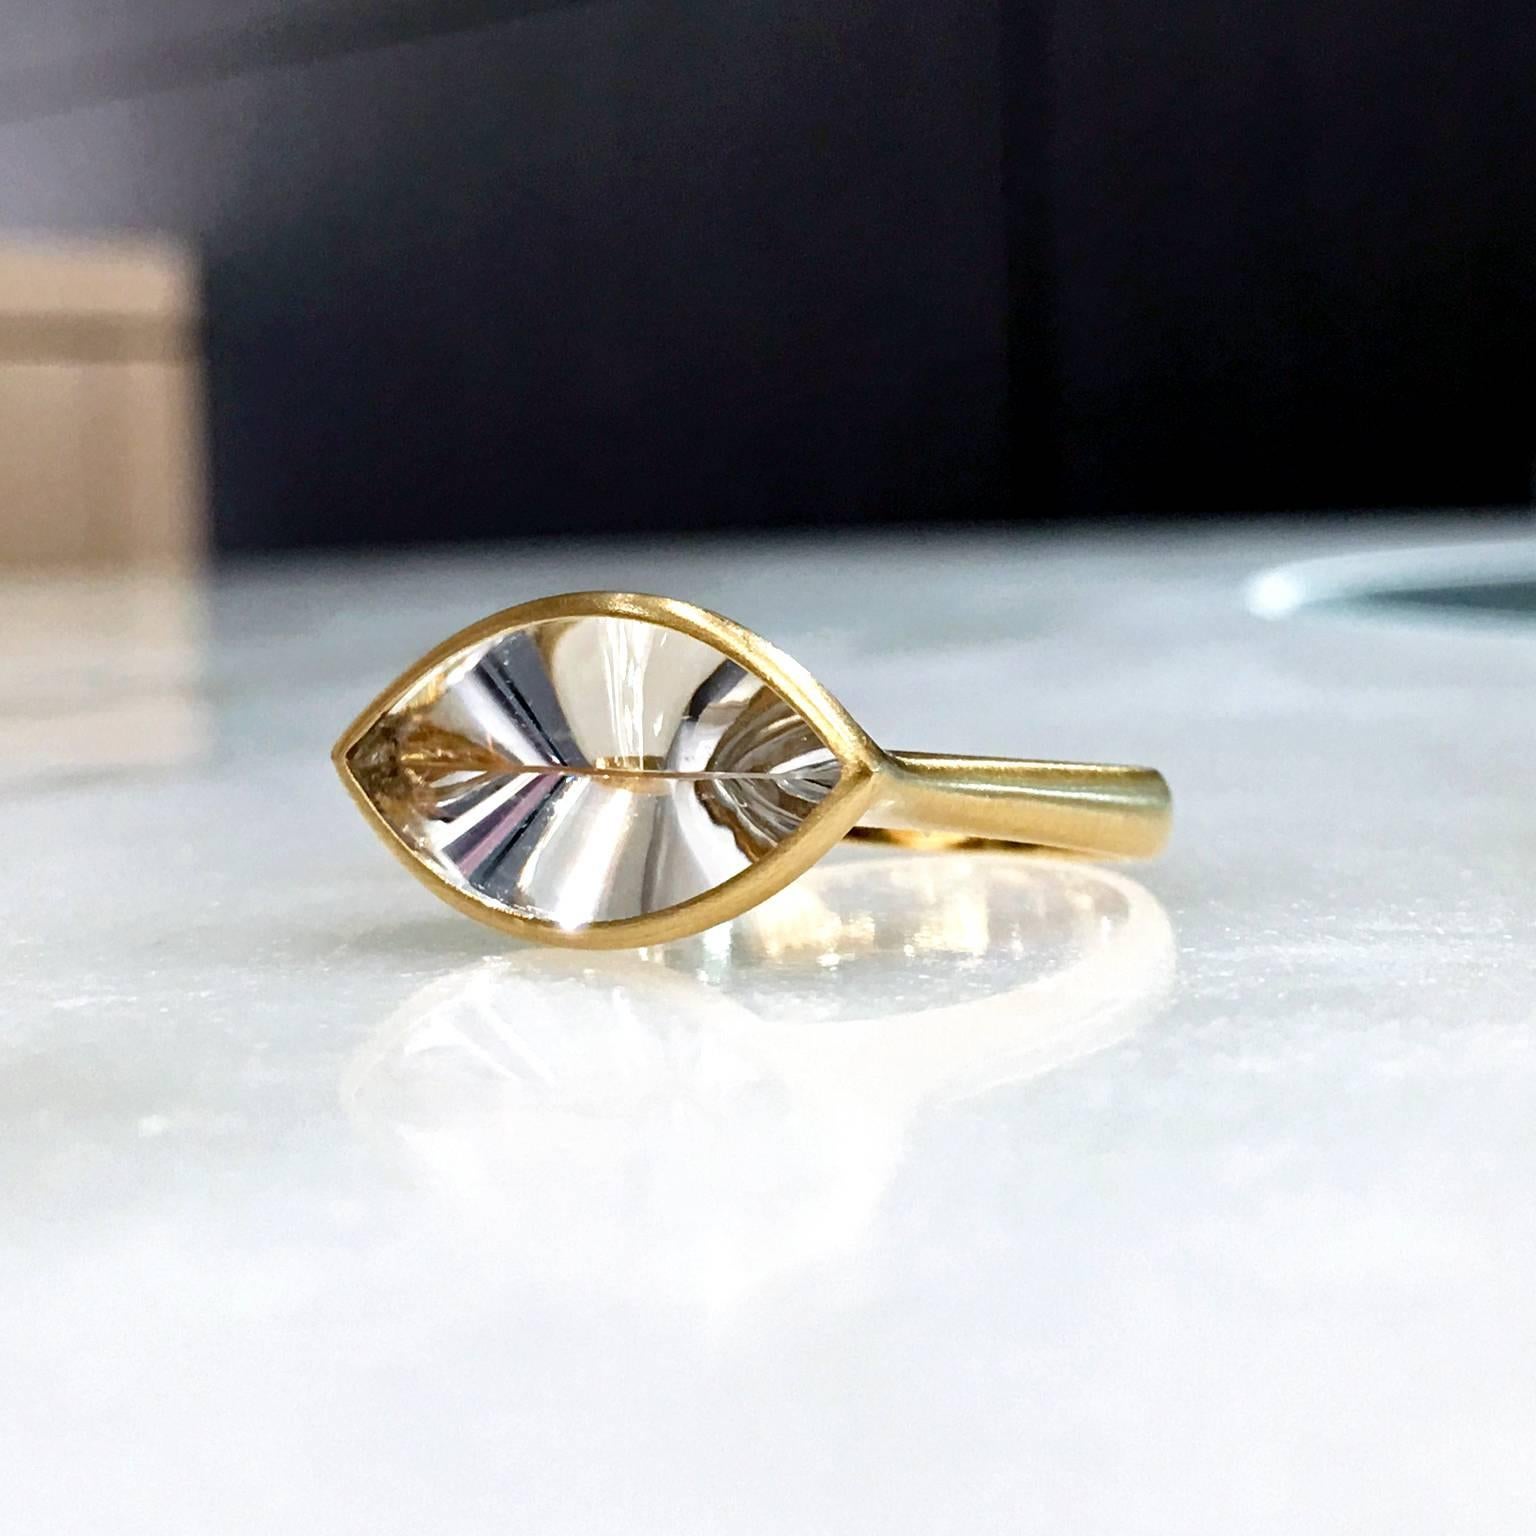 Shine Ring handcrafted by renowned Brazilian jewellery artist Antonio Bernardo in matte-finished 18k yellow gold with a  custom-cut prismatic colorless rock crystal quartz bezel-set on a graduated 18k gold shank. Size 7.0 (can be sized).

Stamped